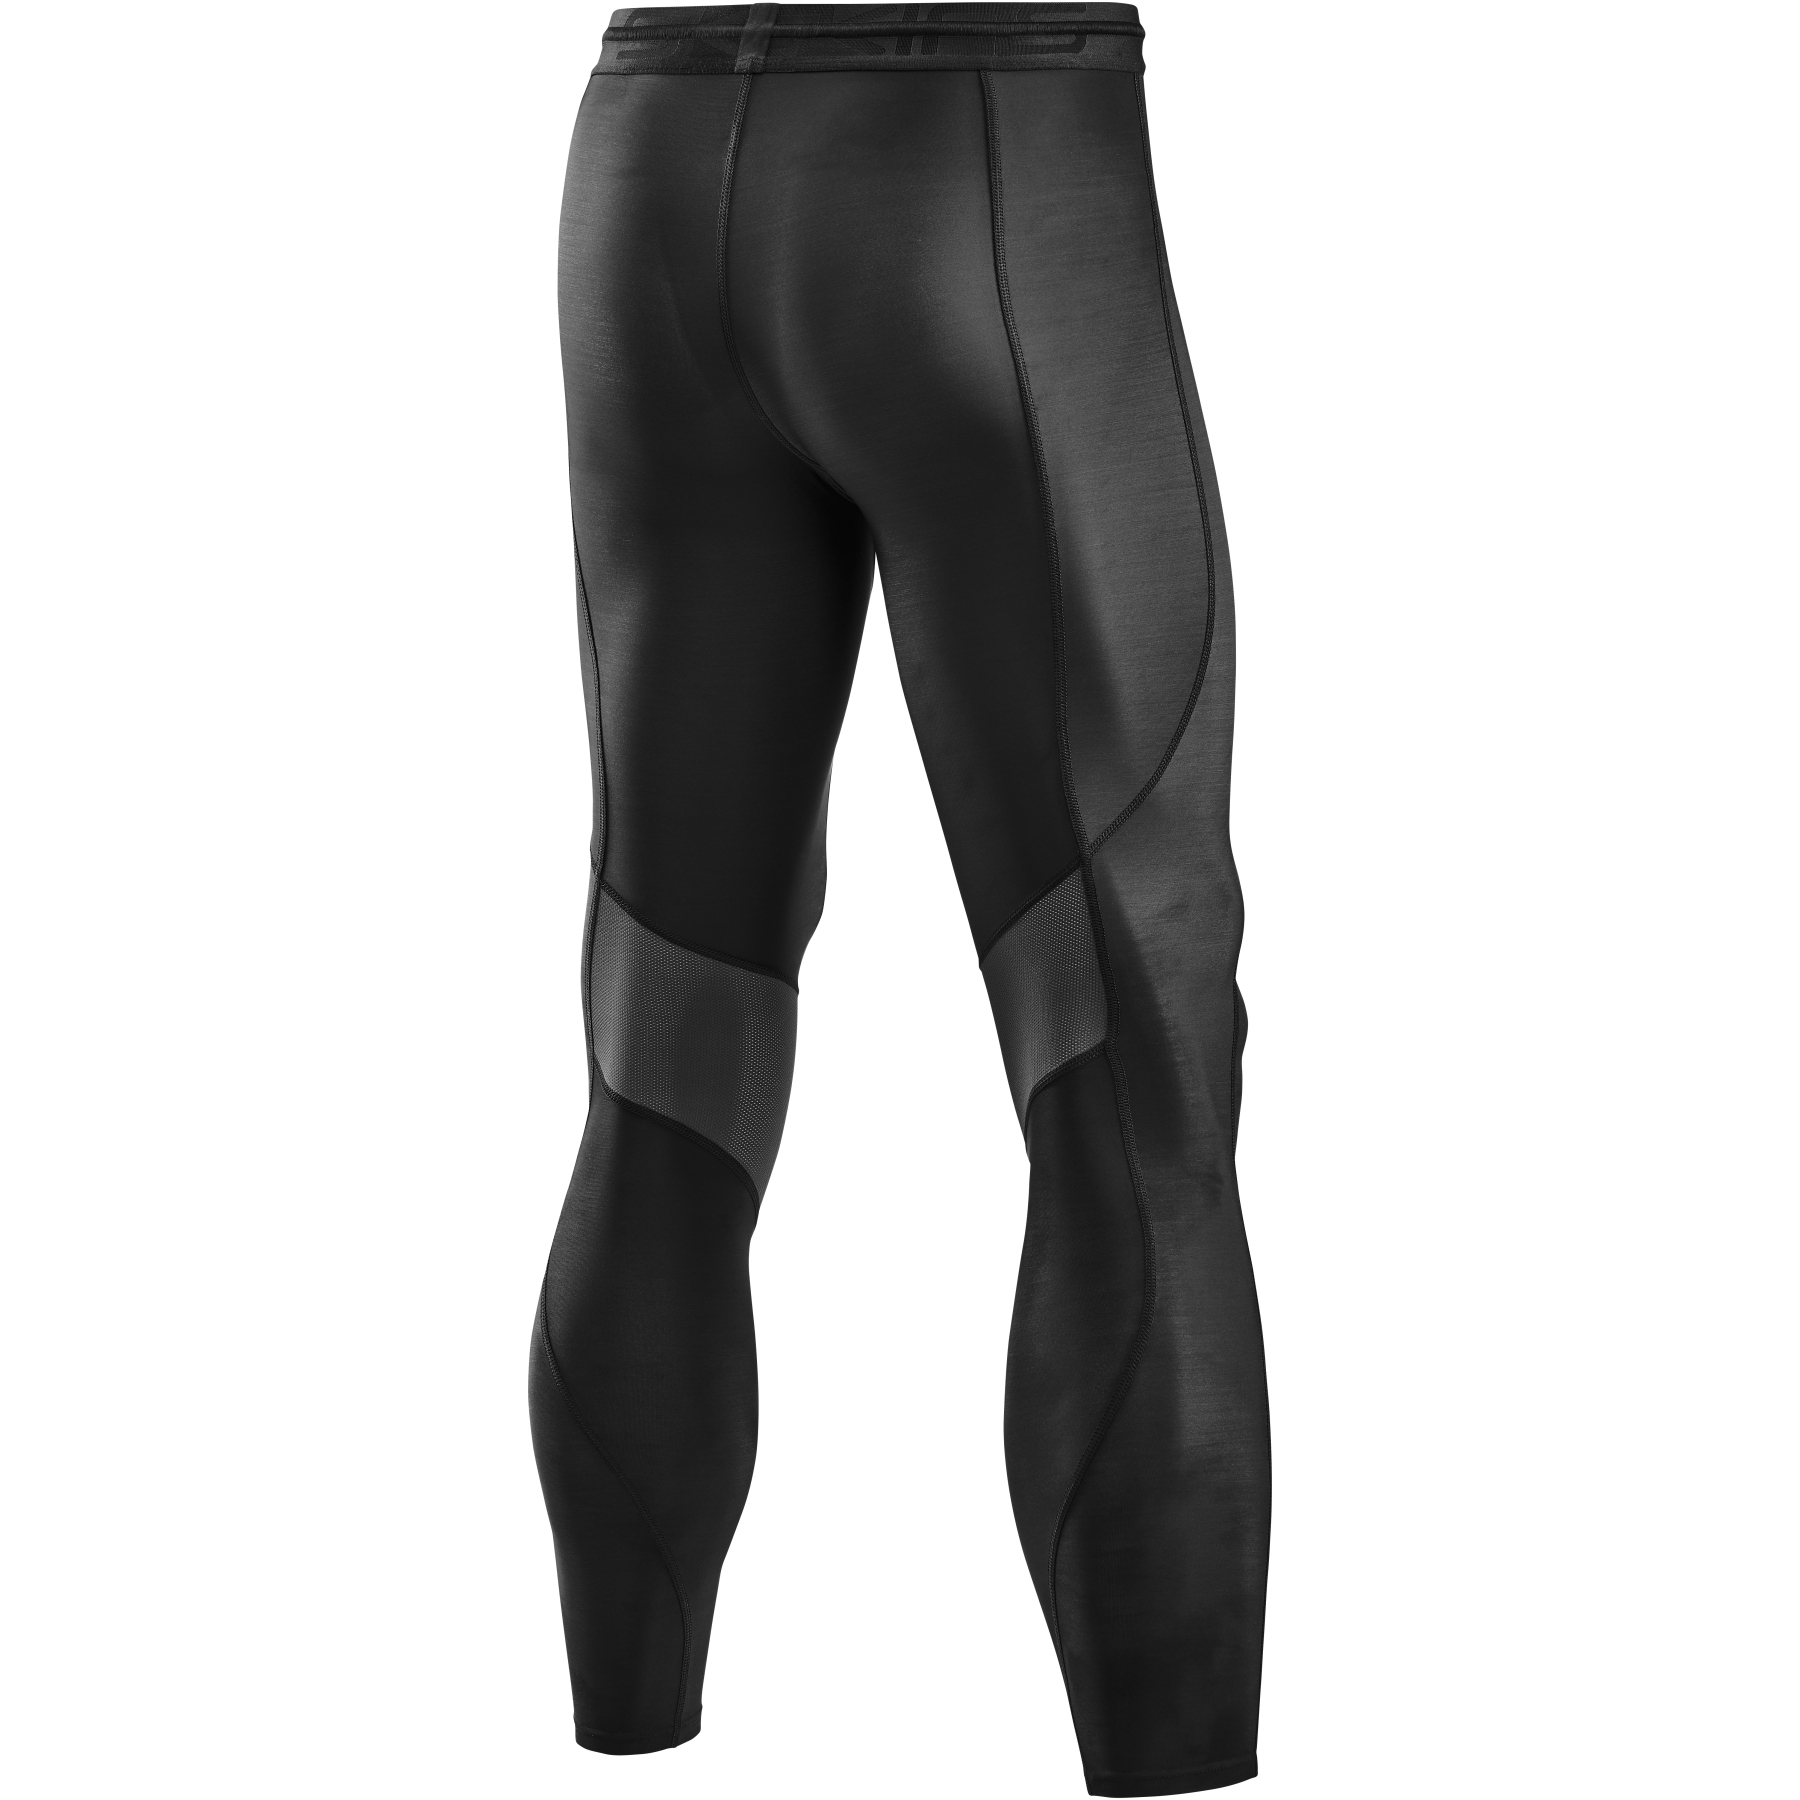 https://images.bike24.com/i/mb/0a/7e/24/skins-compression-3-series-recovery-long-tights-black-graphite-2-1131409.jpg